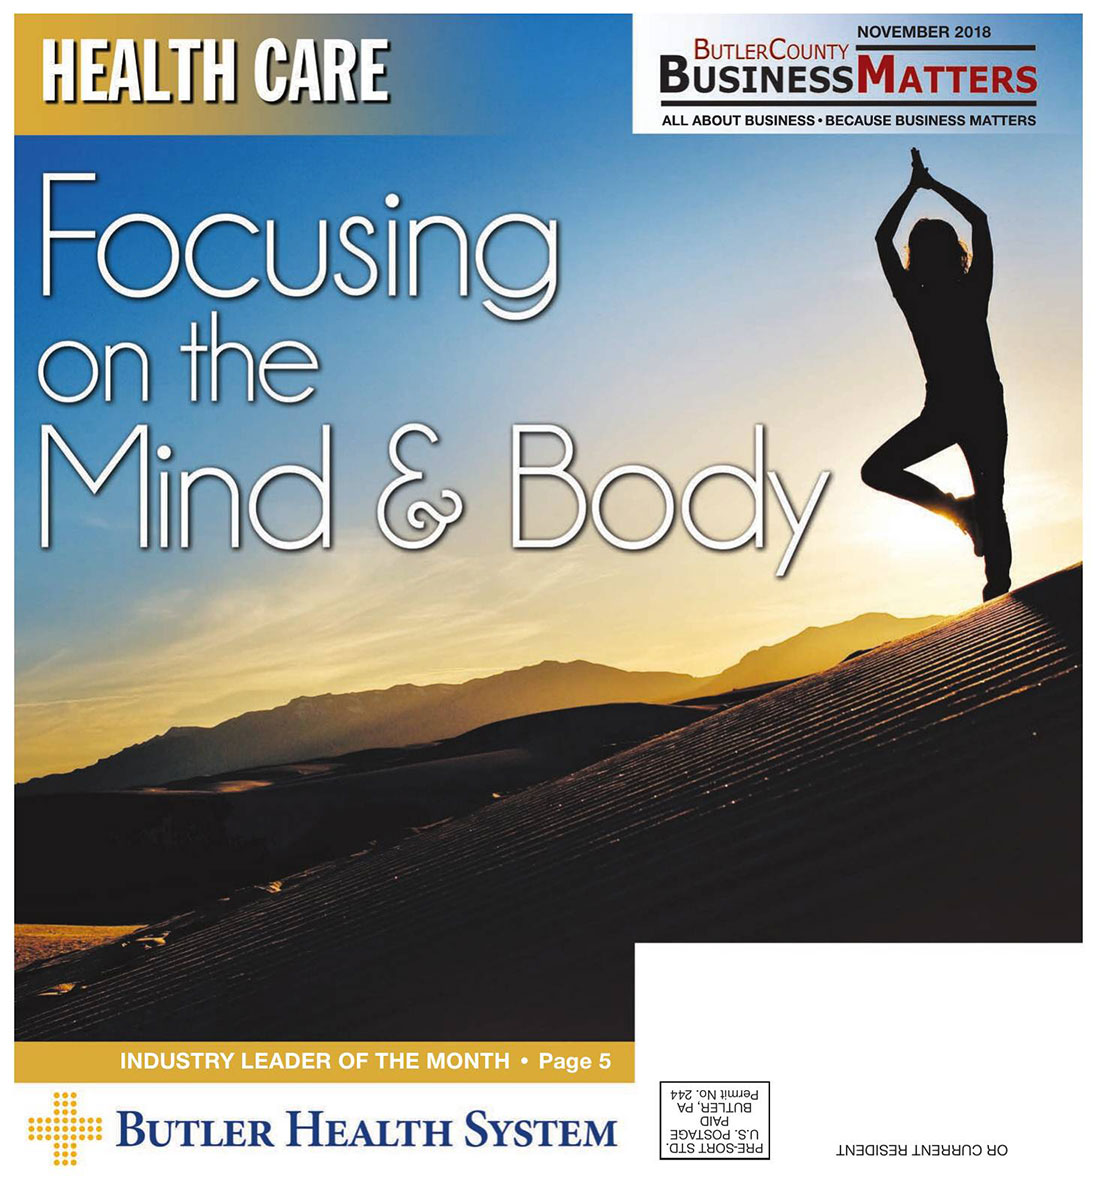 November 2018 - Health Care - Focusing on the Mind & Body